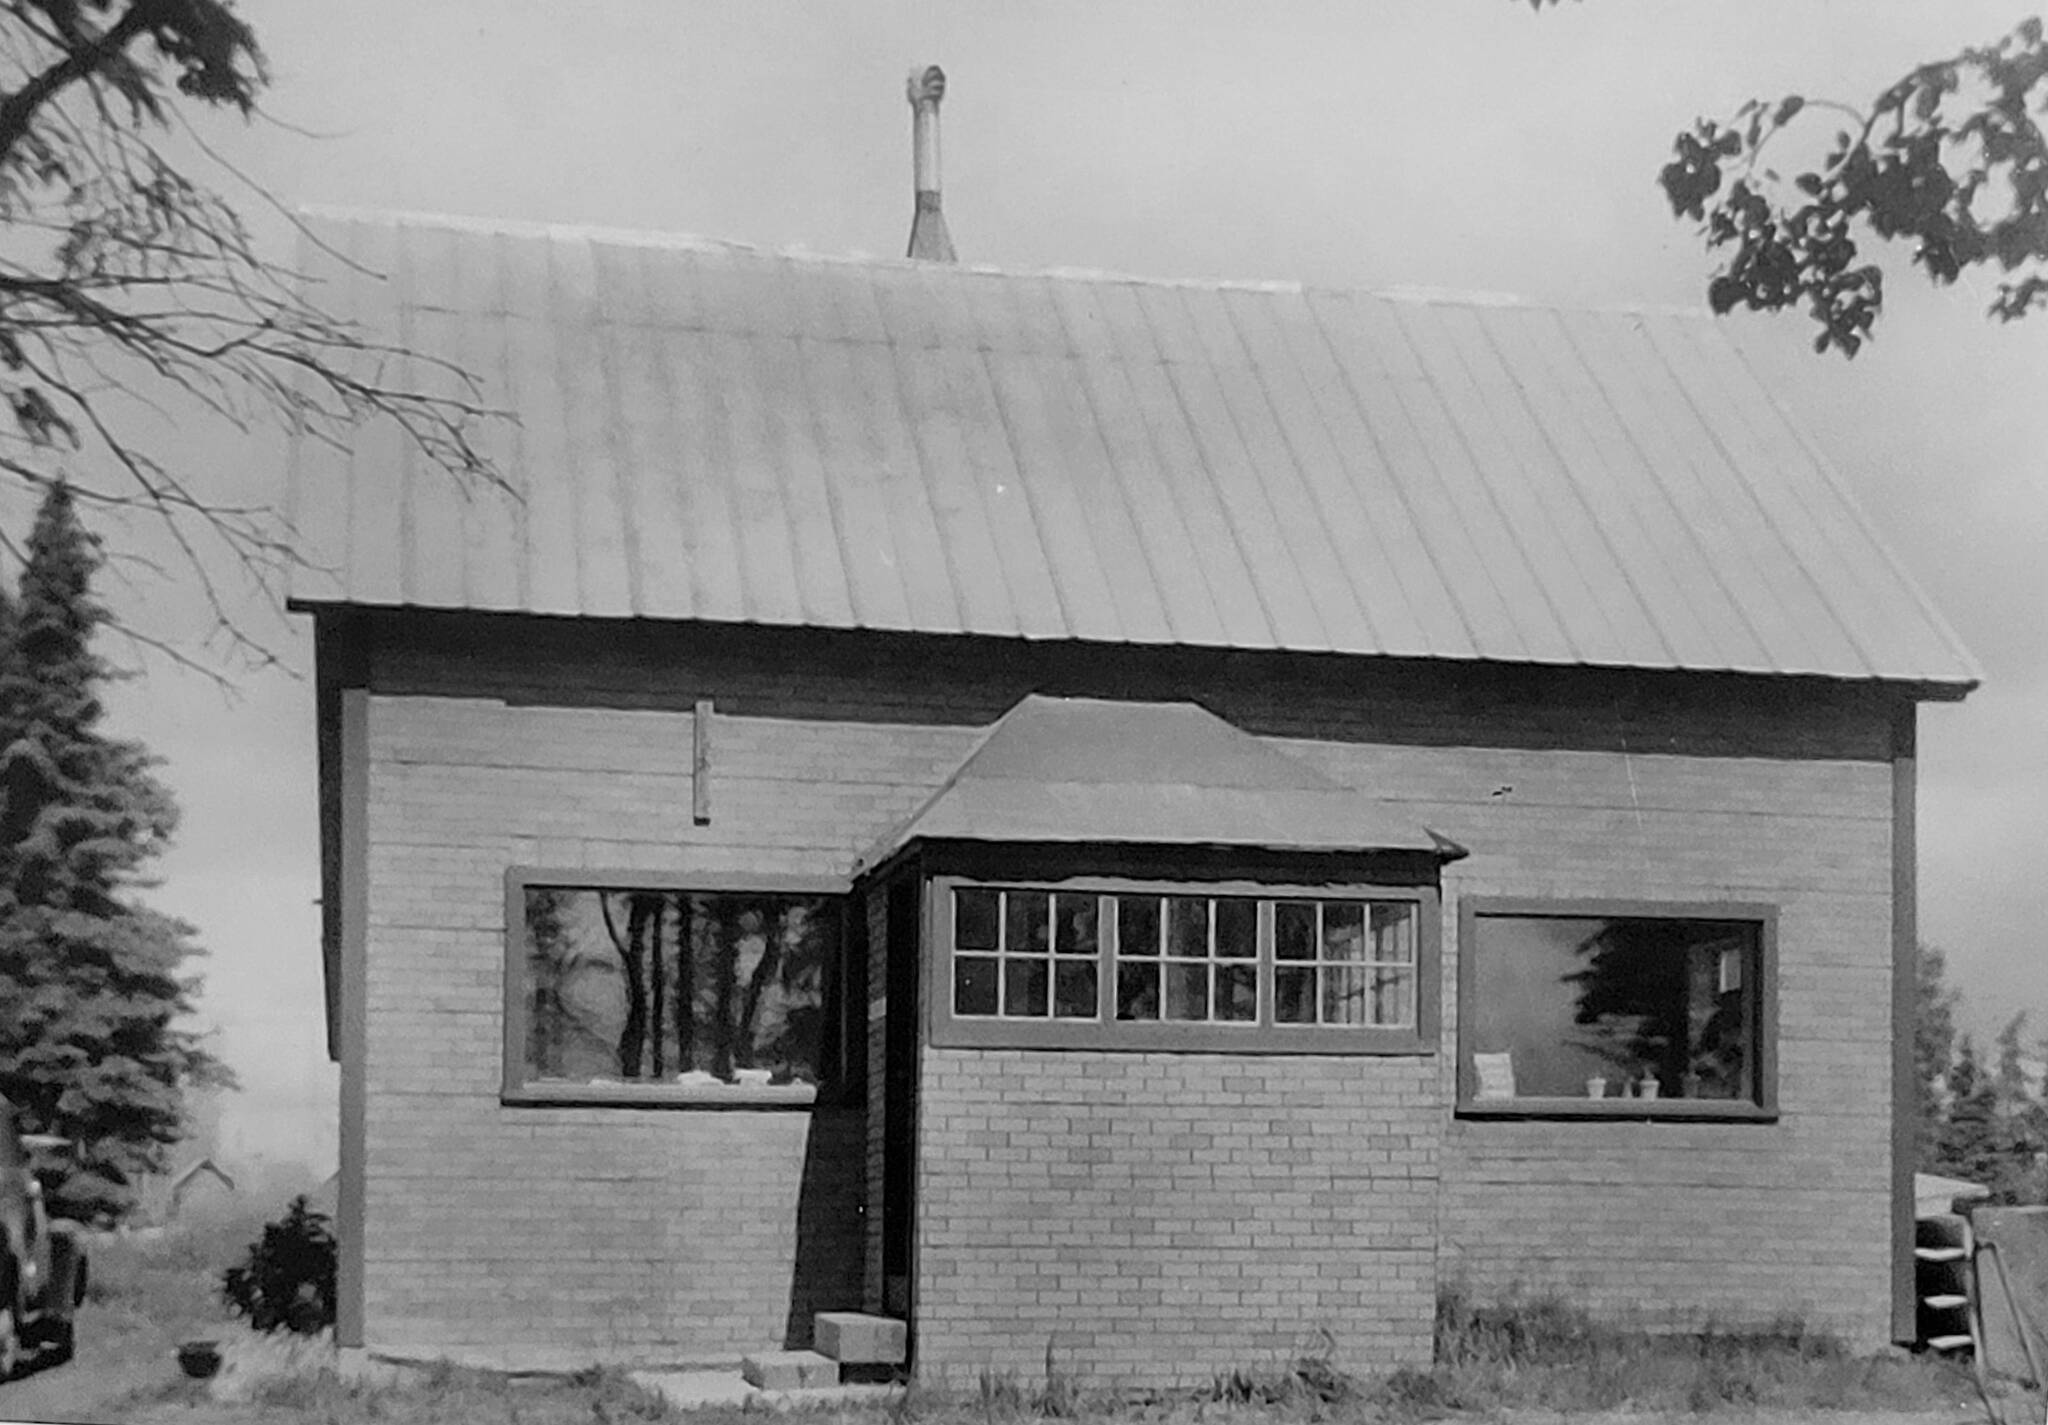 This former Louisa Miller ice cream parlor became Dr. Marian Goble’s first home and clinic in Kenai, 1958. (Photo courtesy of Ben and Marian Goble)